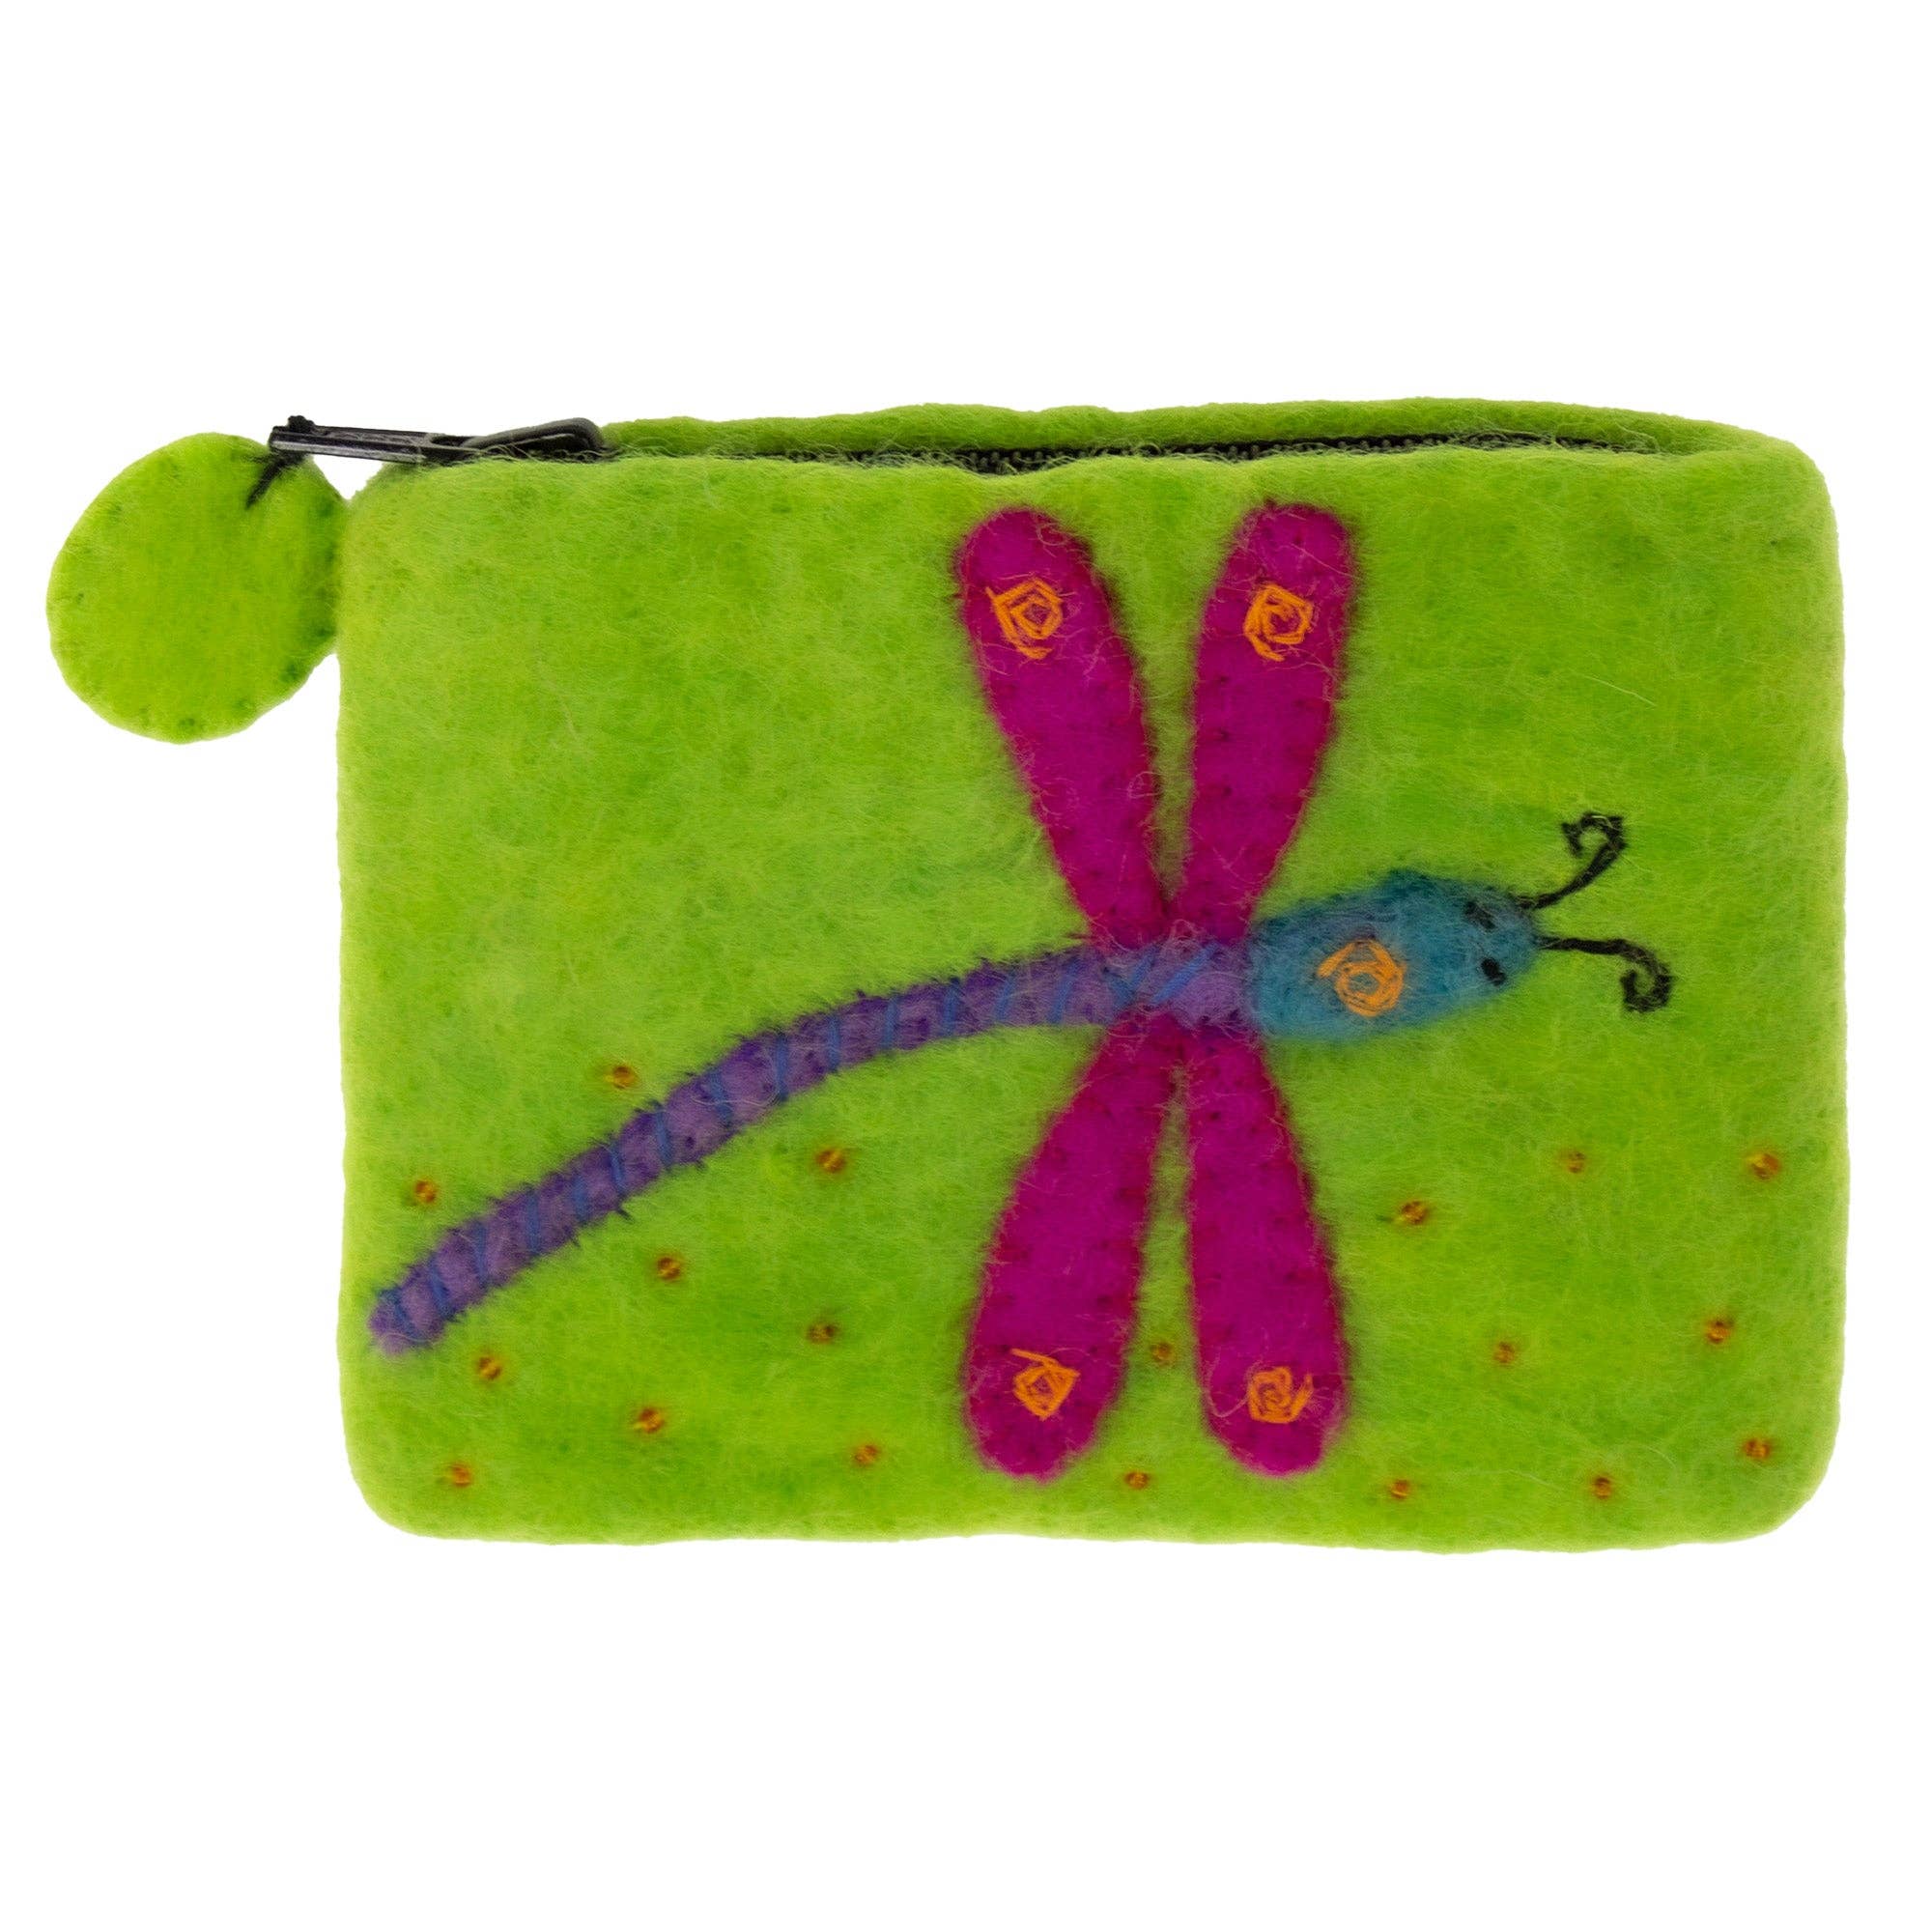 Handcrafted Dragonfly Felt Coin Purse / Small Zipper Pouch